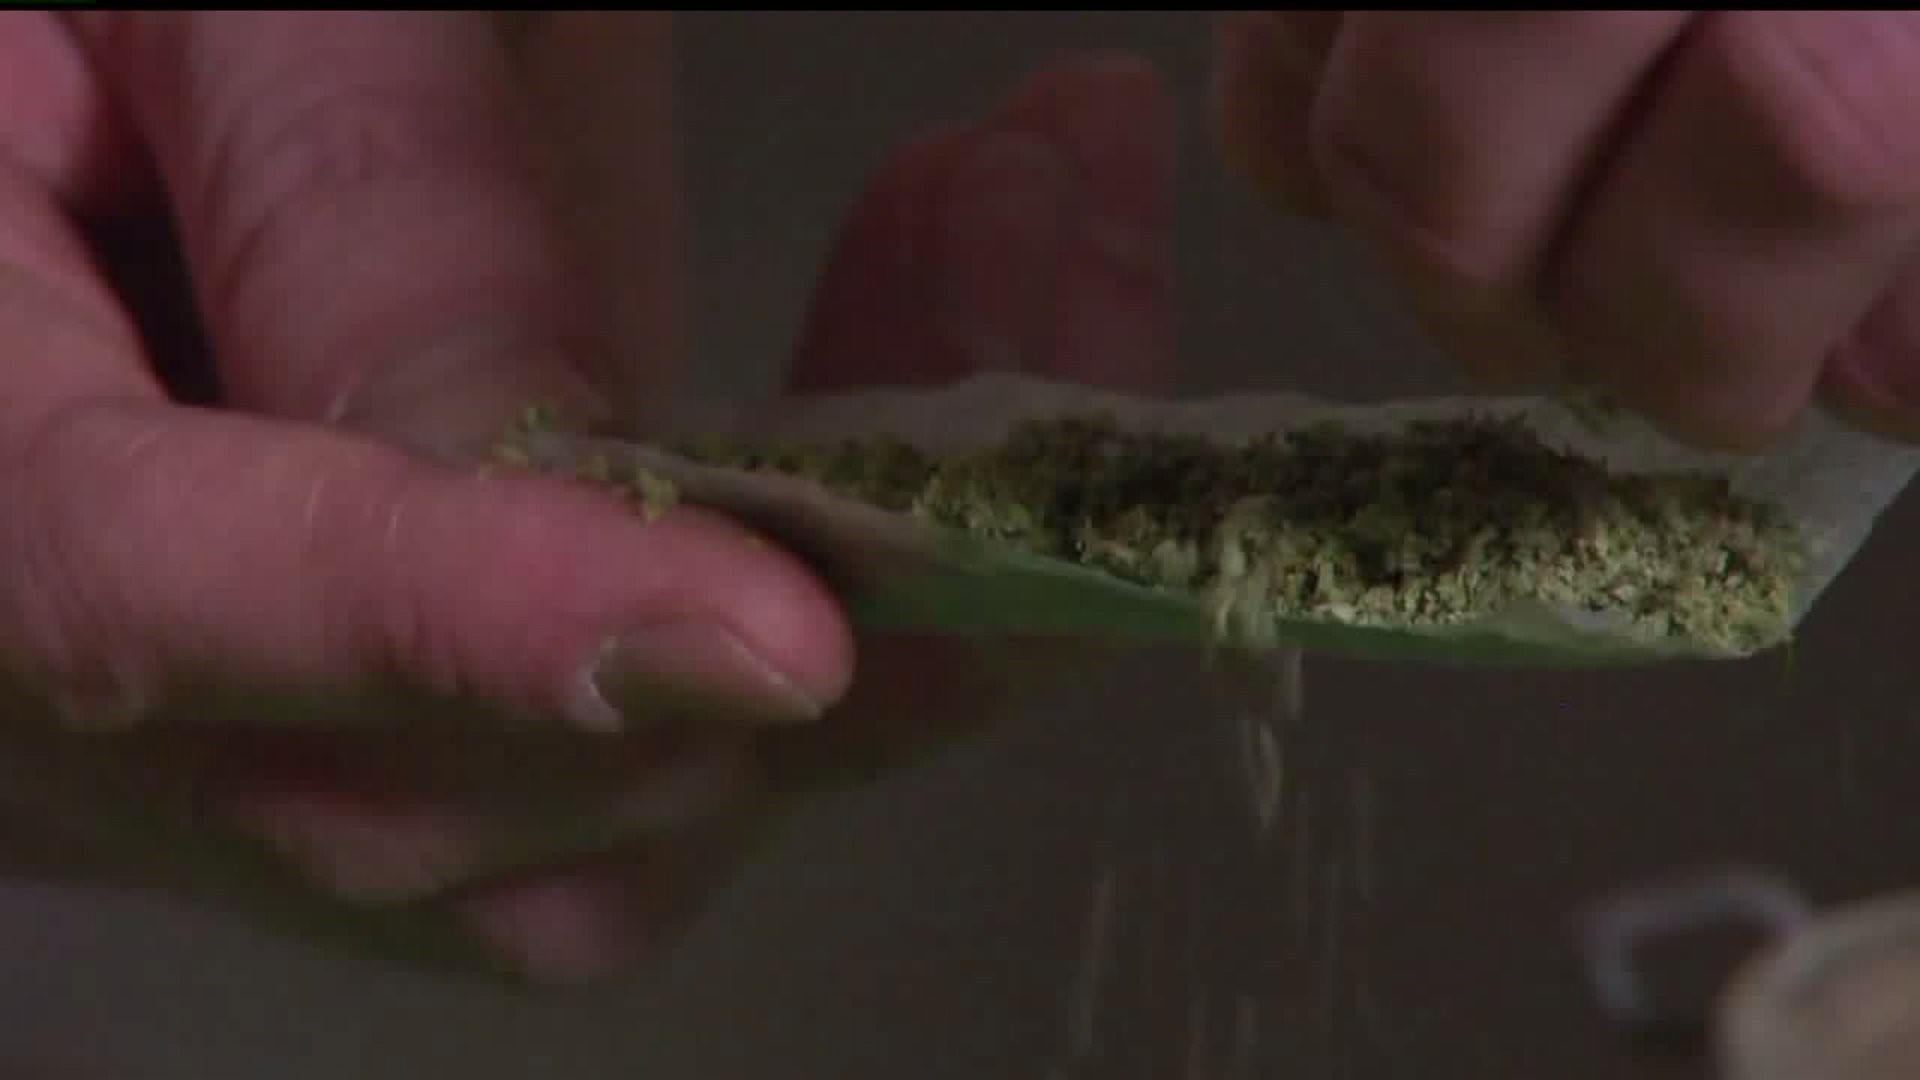 York City ordinance lessens penalties for people caught with marijuana  Would it preempt state law?